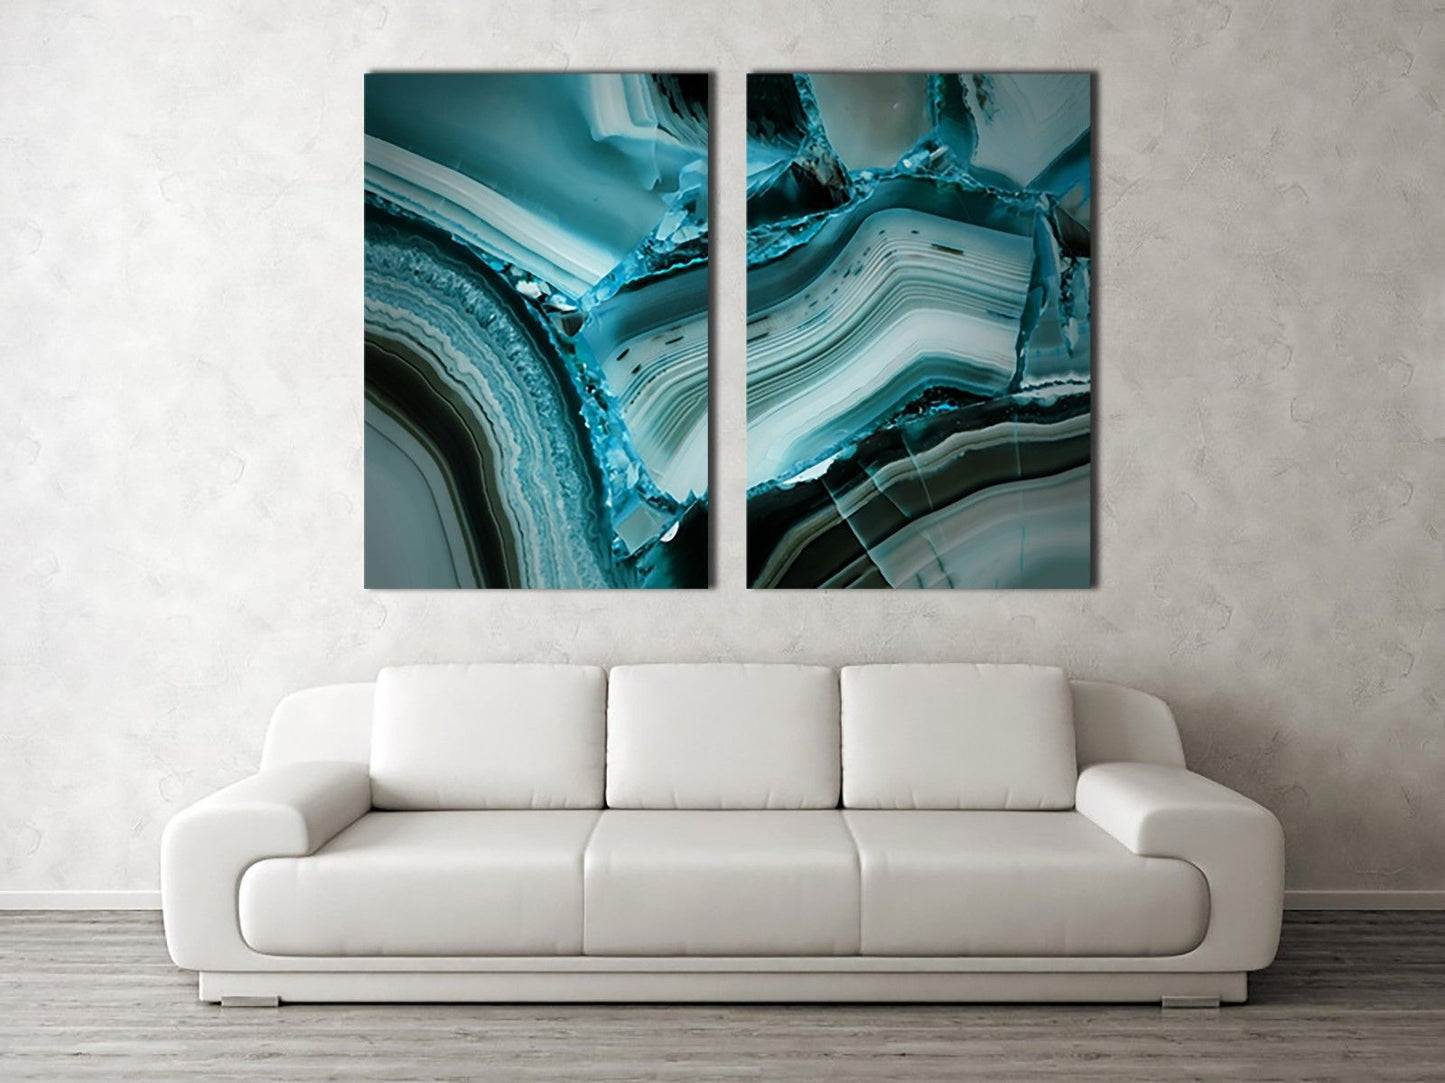 Mineral Cut Blue Crystal Framed Canvas Print Abstract Room Wall Art